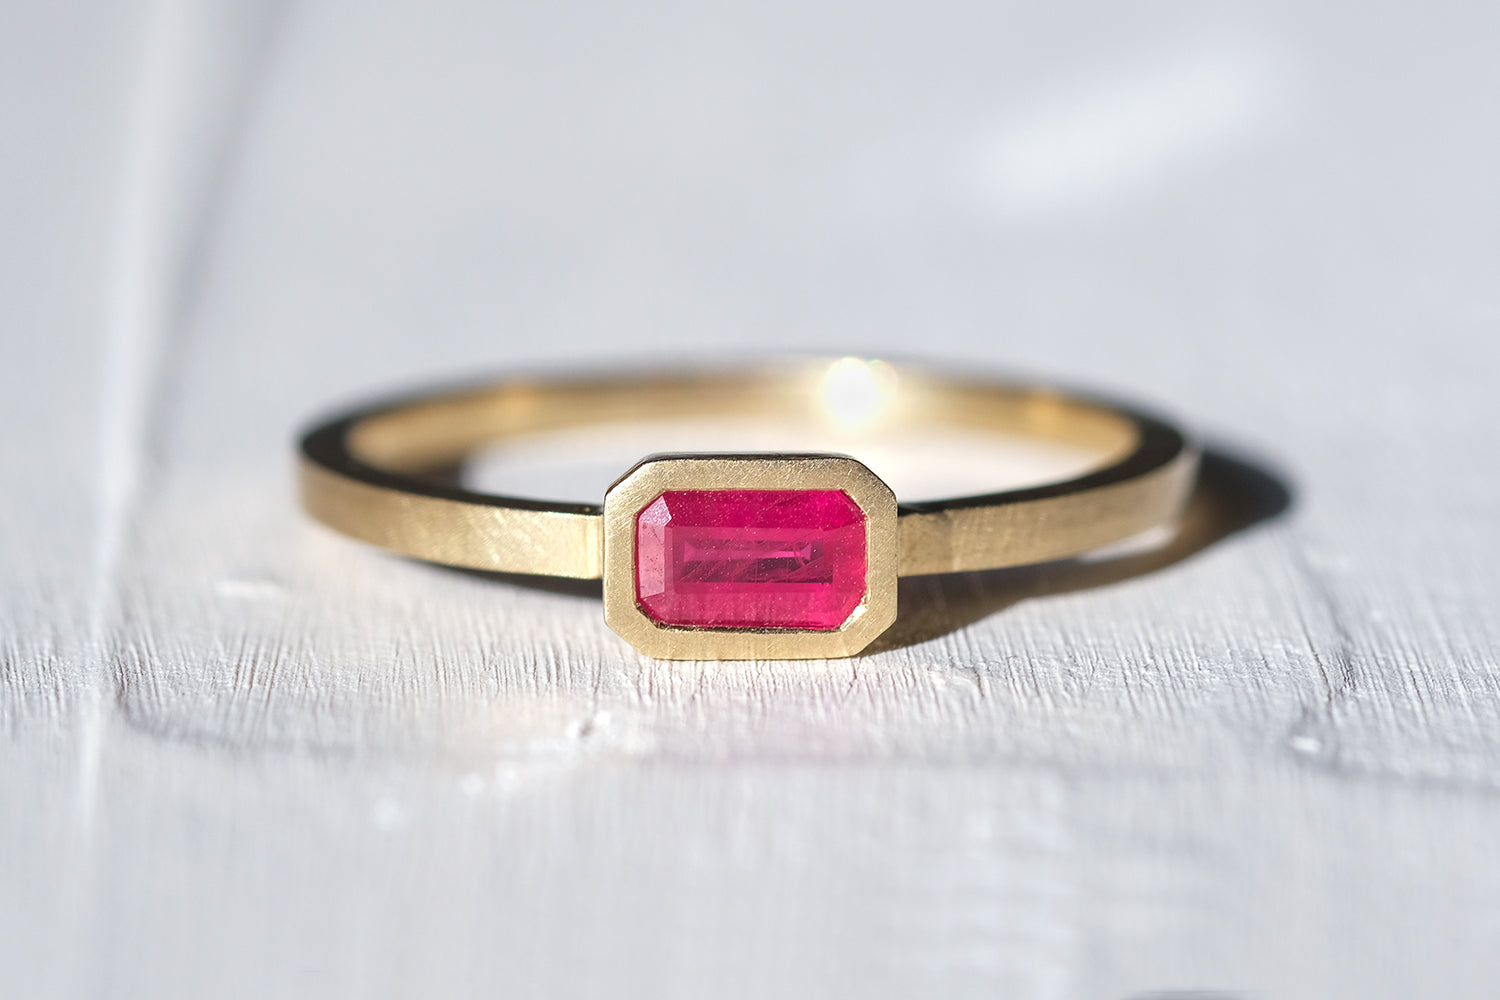 Gold Ring Set With A Ruby